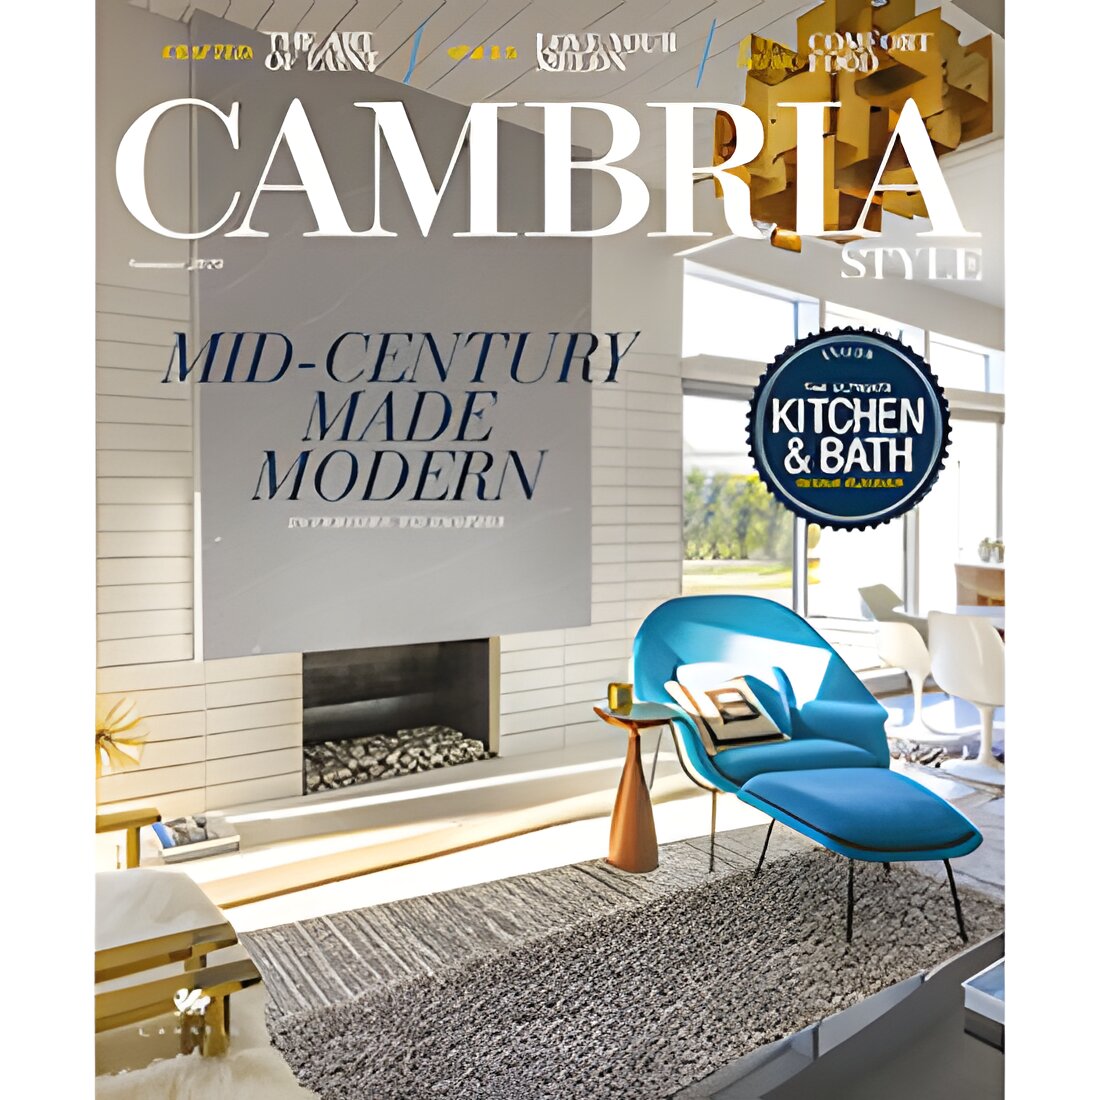 Free Complimentary Subscription To Cambria Style Magazine